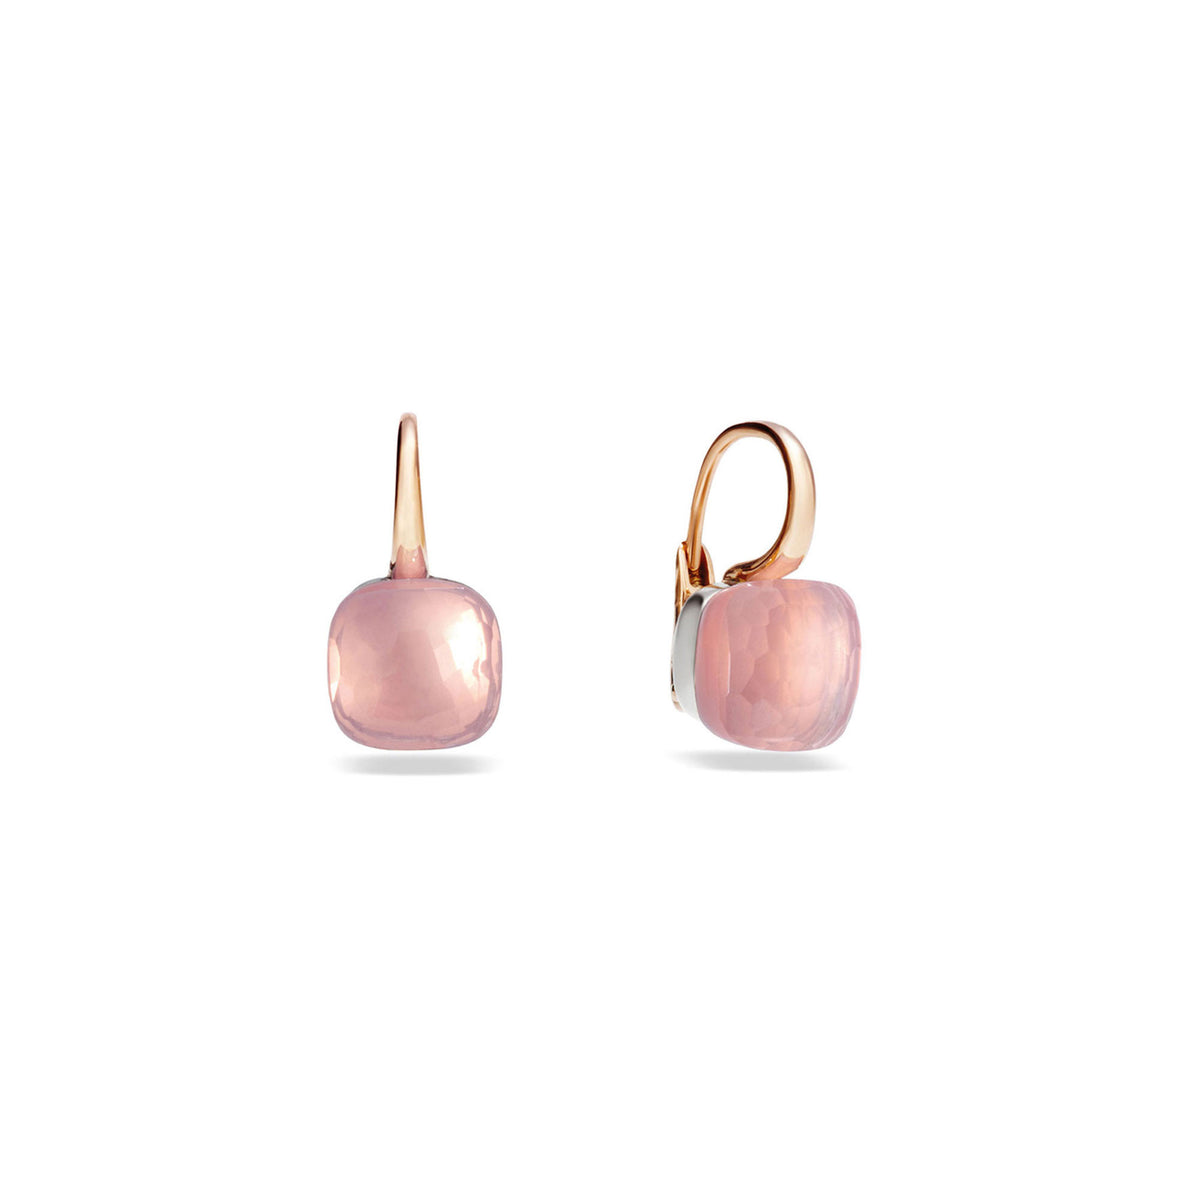 Nudo Classic Earrings in 18k Rose and White Gold with Pink Quartz - Orsini Jewellers NZ